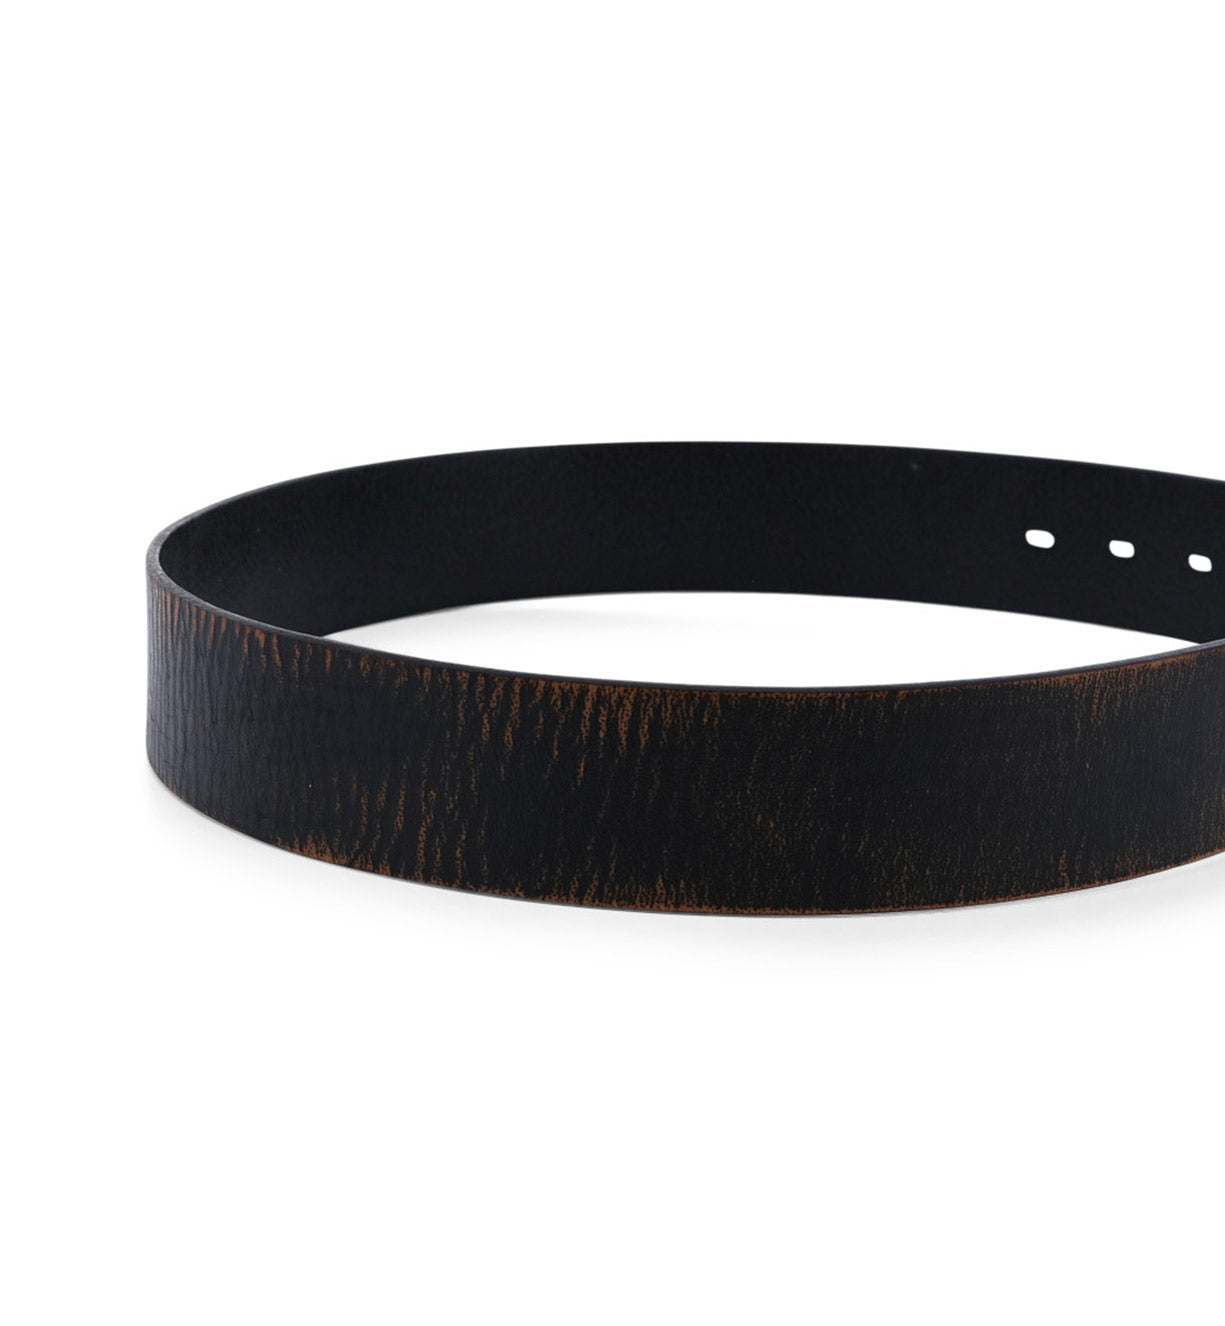 A Hobo black leather belt on a white background by Bed Stu.